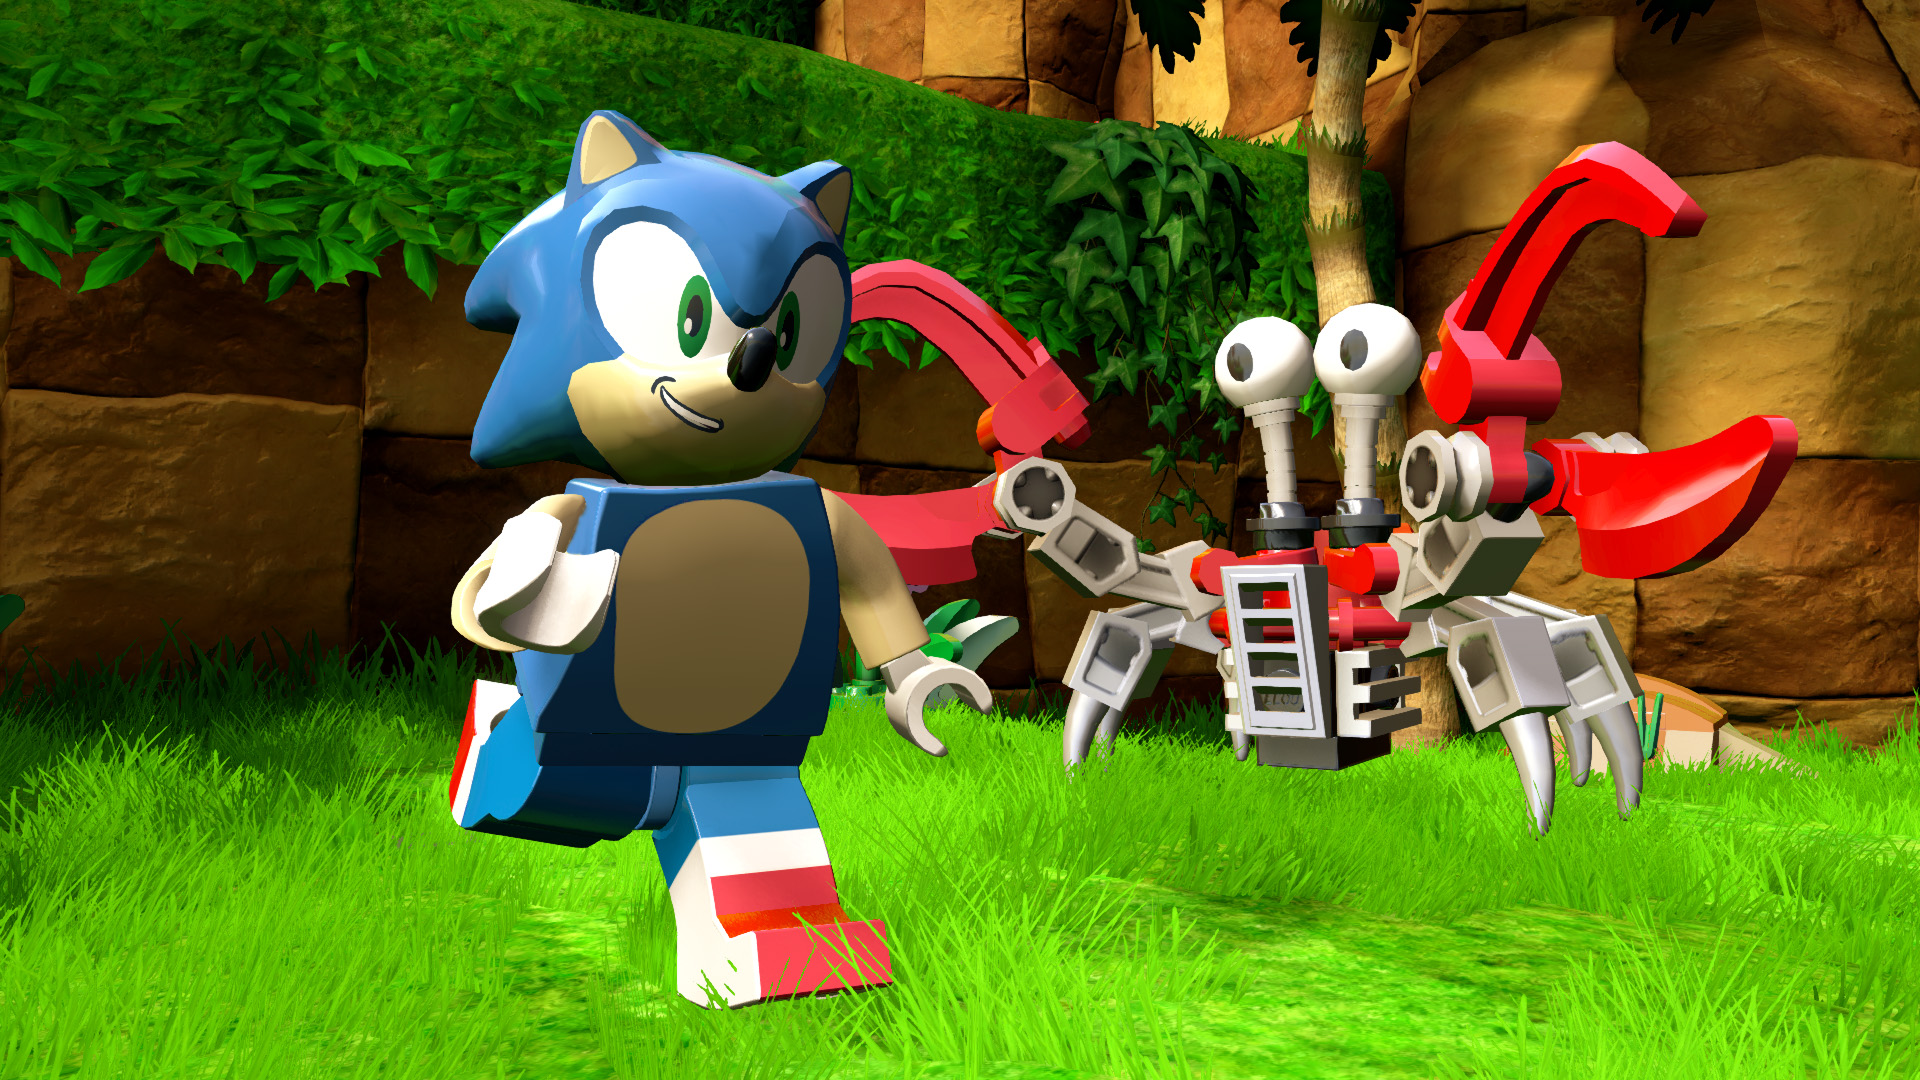 Sonic The Hedgehog And Fantastic Beasts Headline Lego Dimensions' Wave Seven